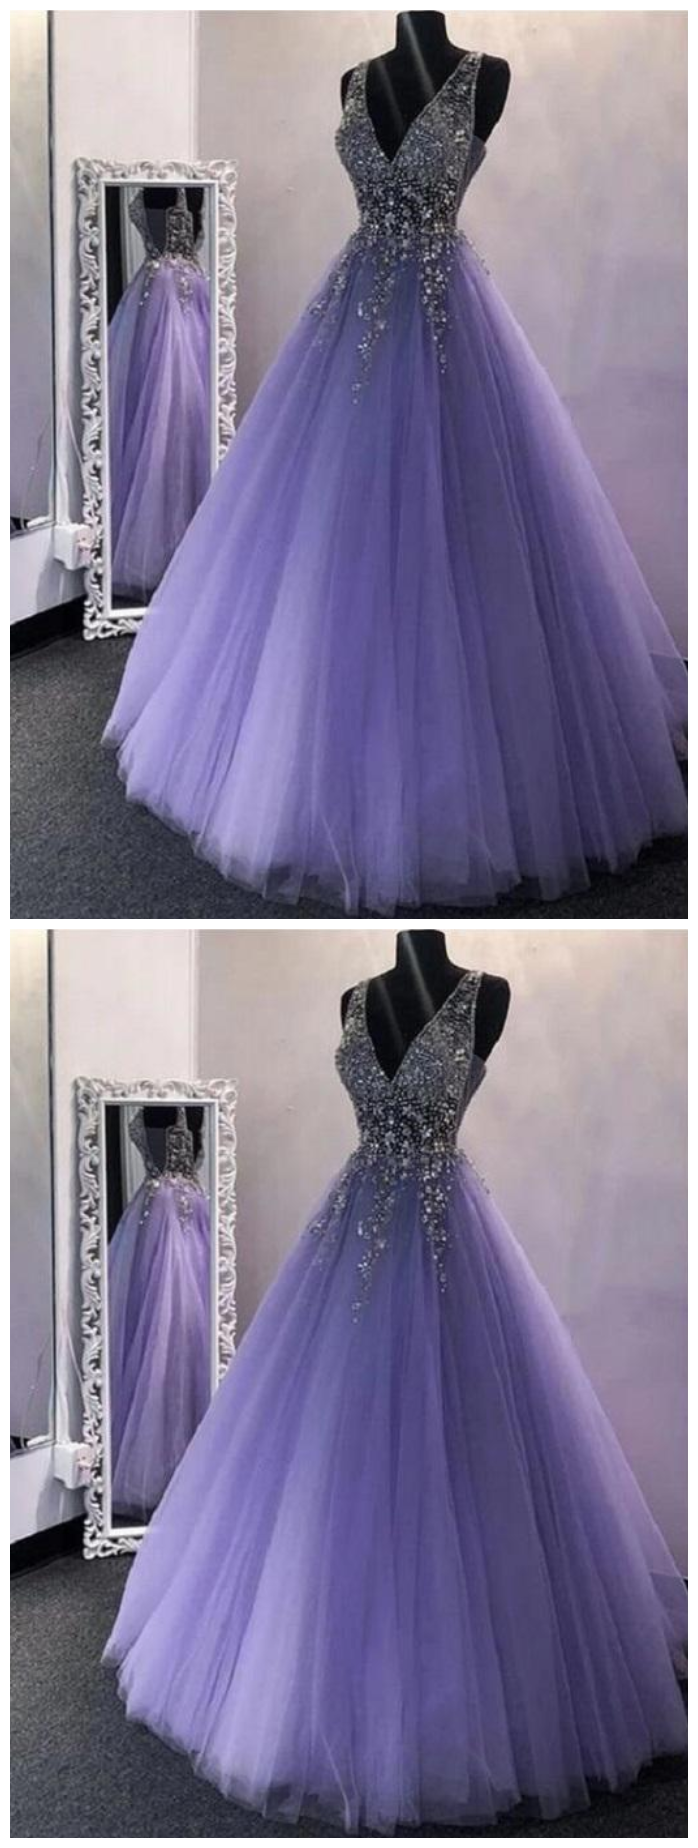 Sparkly Lavender Tulle Prom Dress Girls Slay Ball Gown Puffy Prom Dress